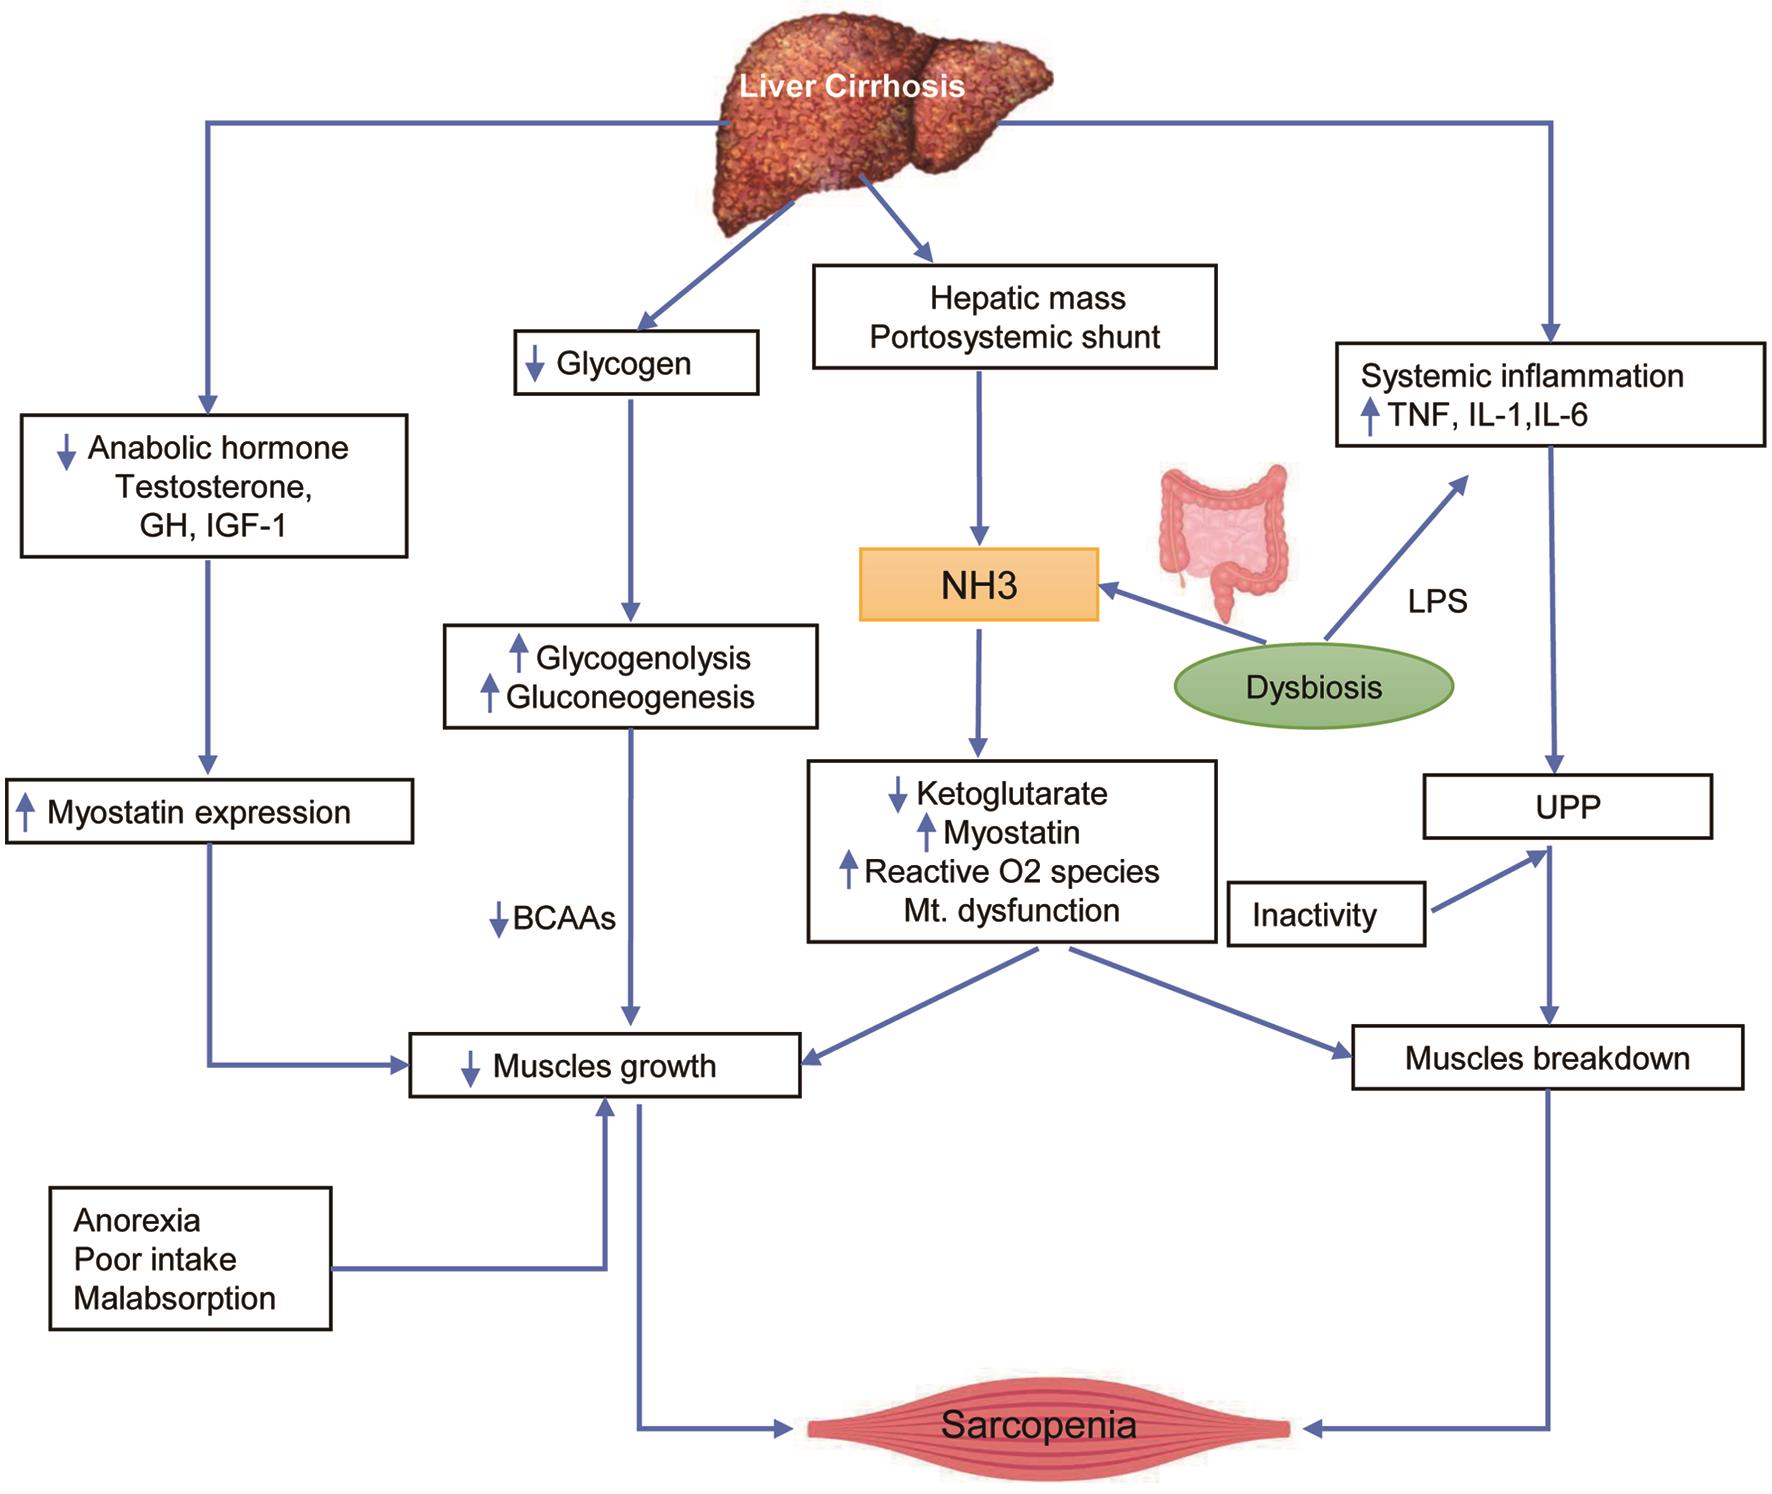 Schematic explanation main drivers and mechanism contributing to sarcopenia in patients with liver cirrhosis.